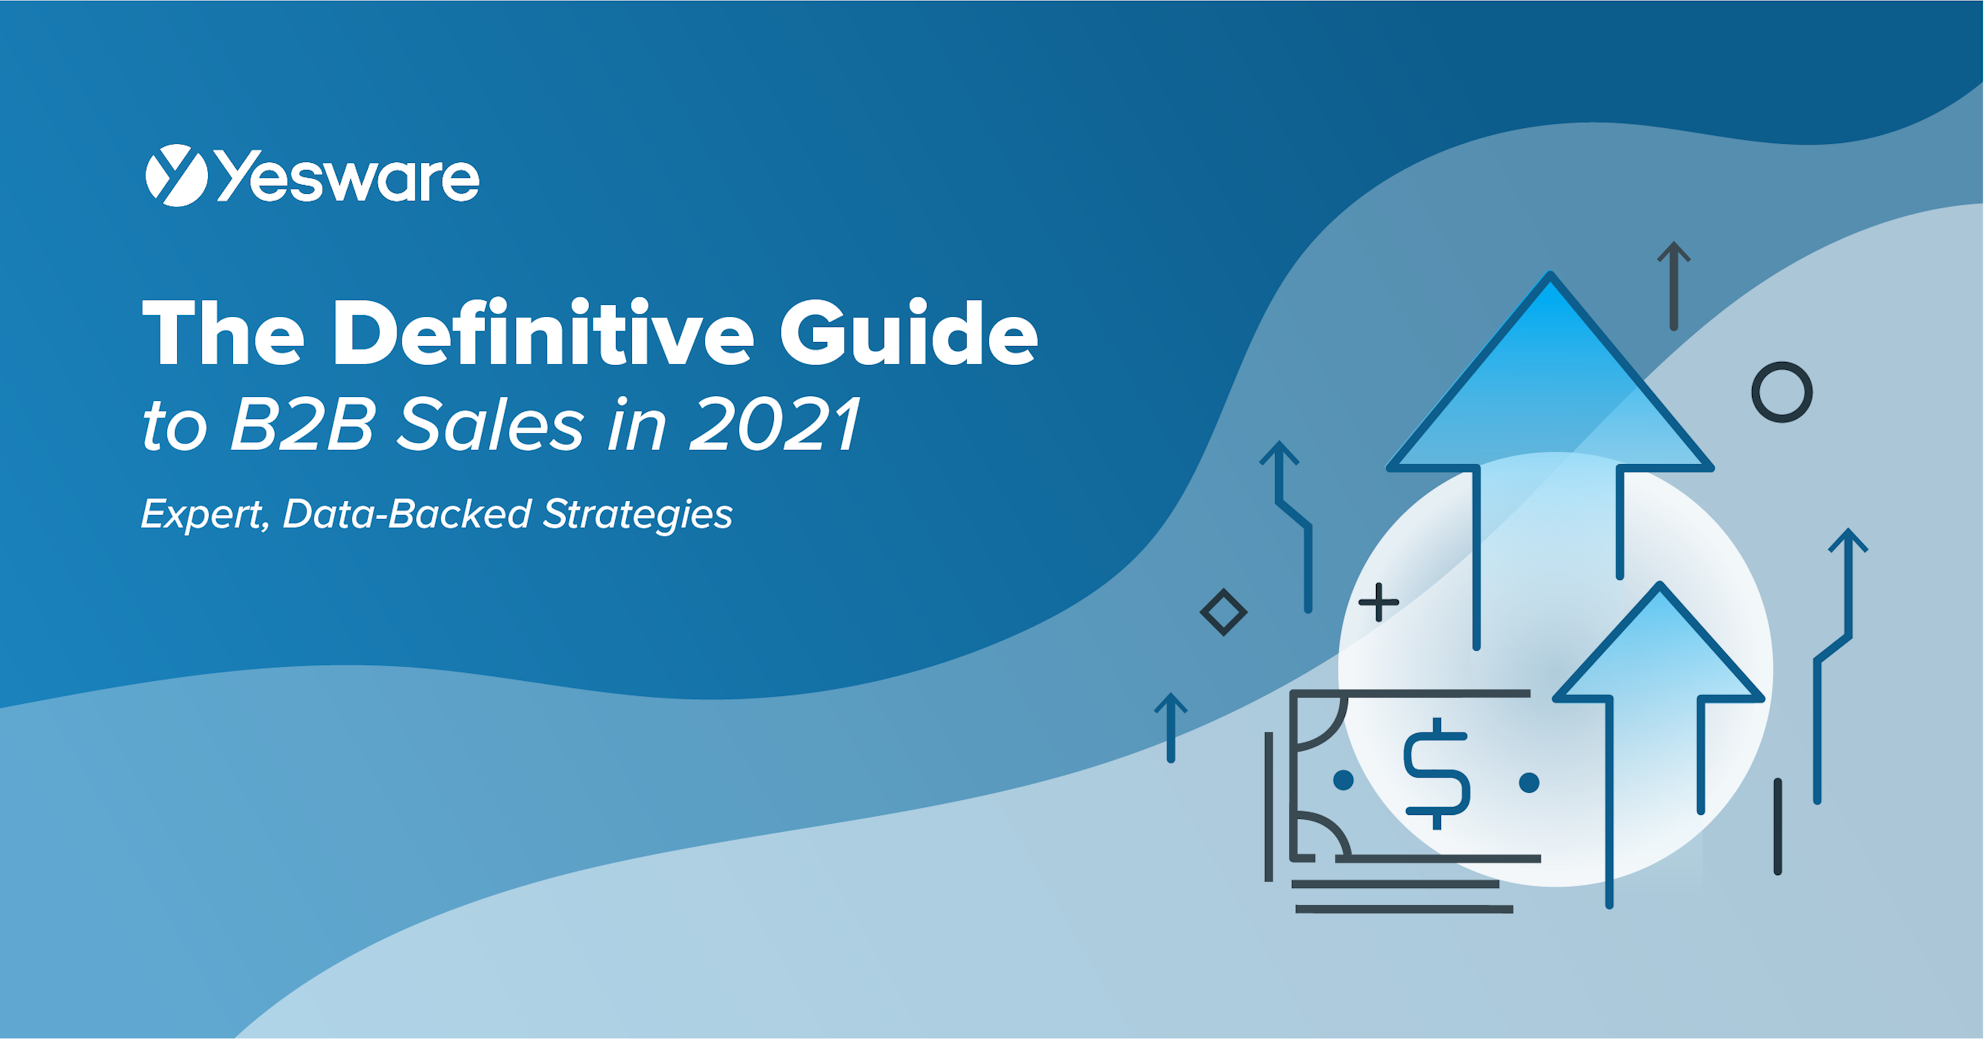 The Definitive Guide to B2B Sales in 2021 (Expert, Data-Backed Strategies)